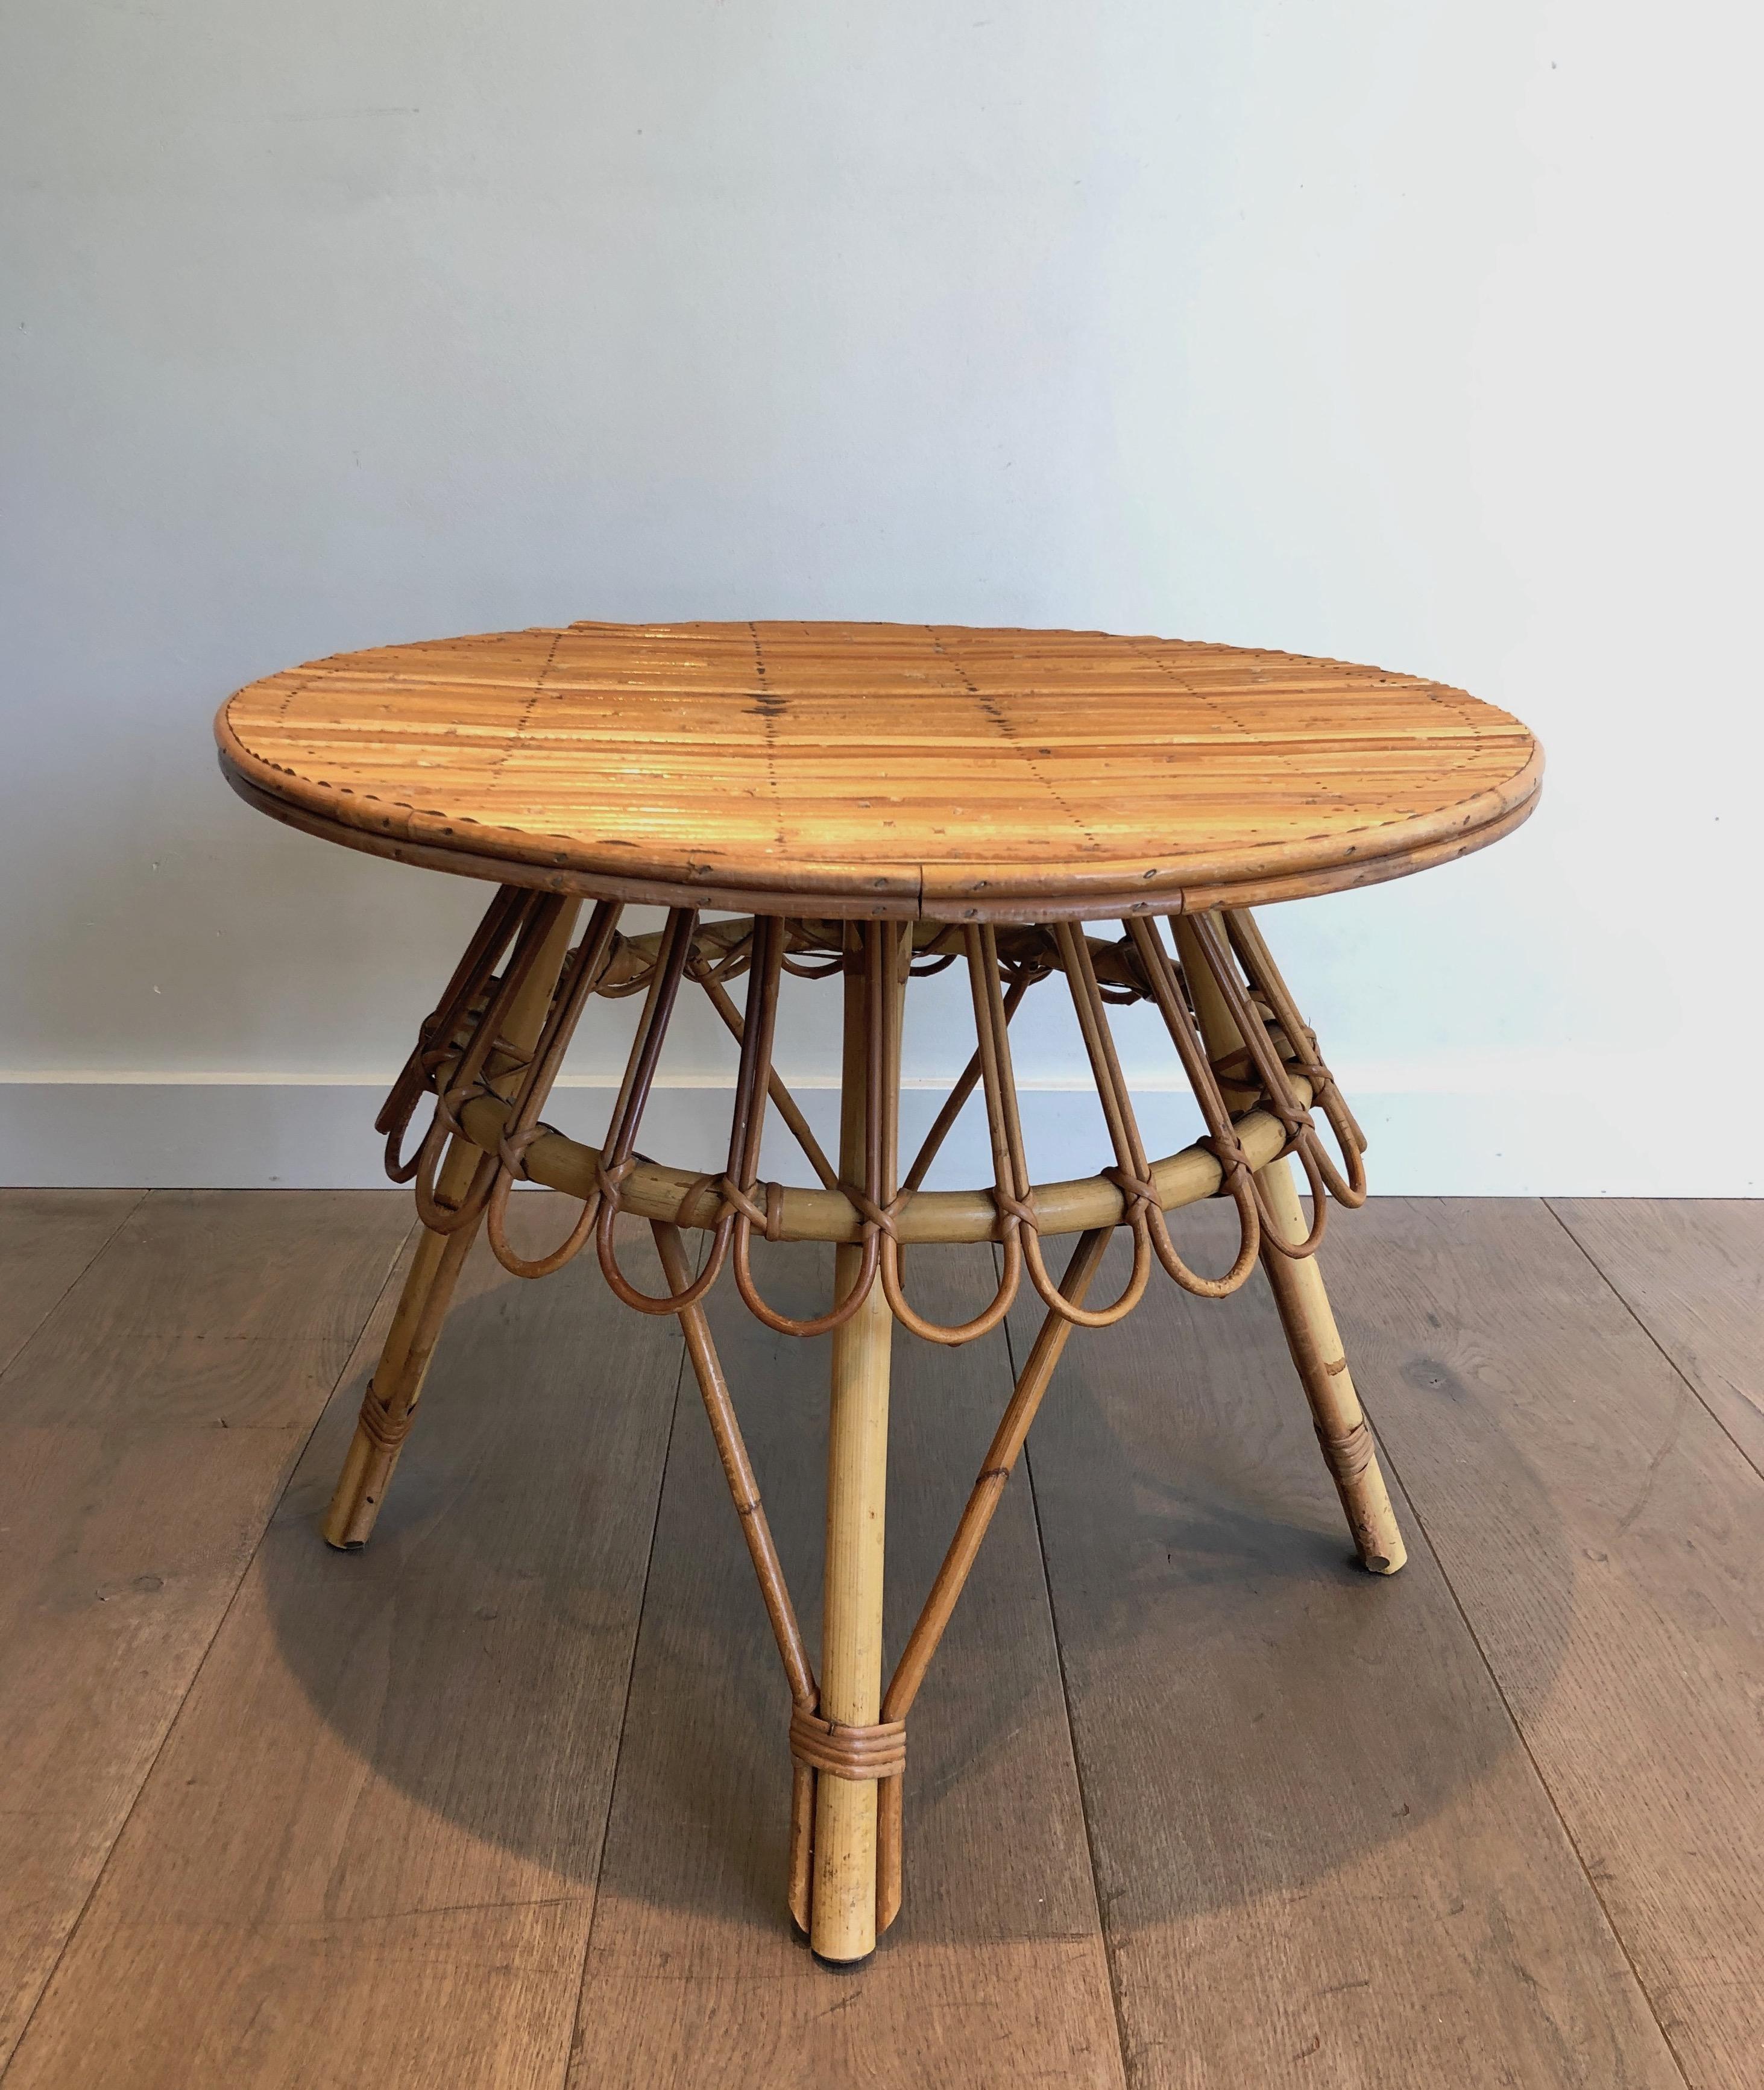 Mid-Century Modern Round Rattan Coffee Table Attributed to Audoux Minet. French Work, Circa 1950